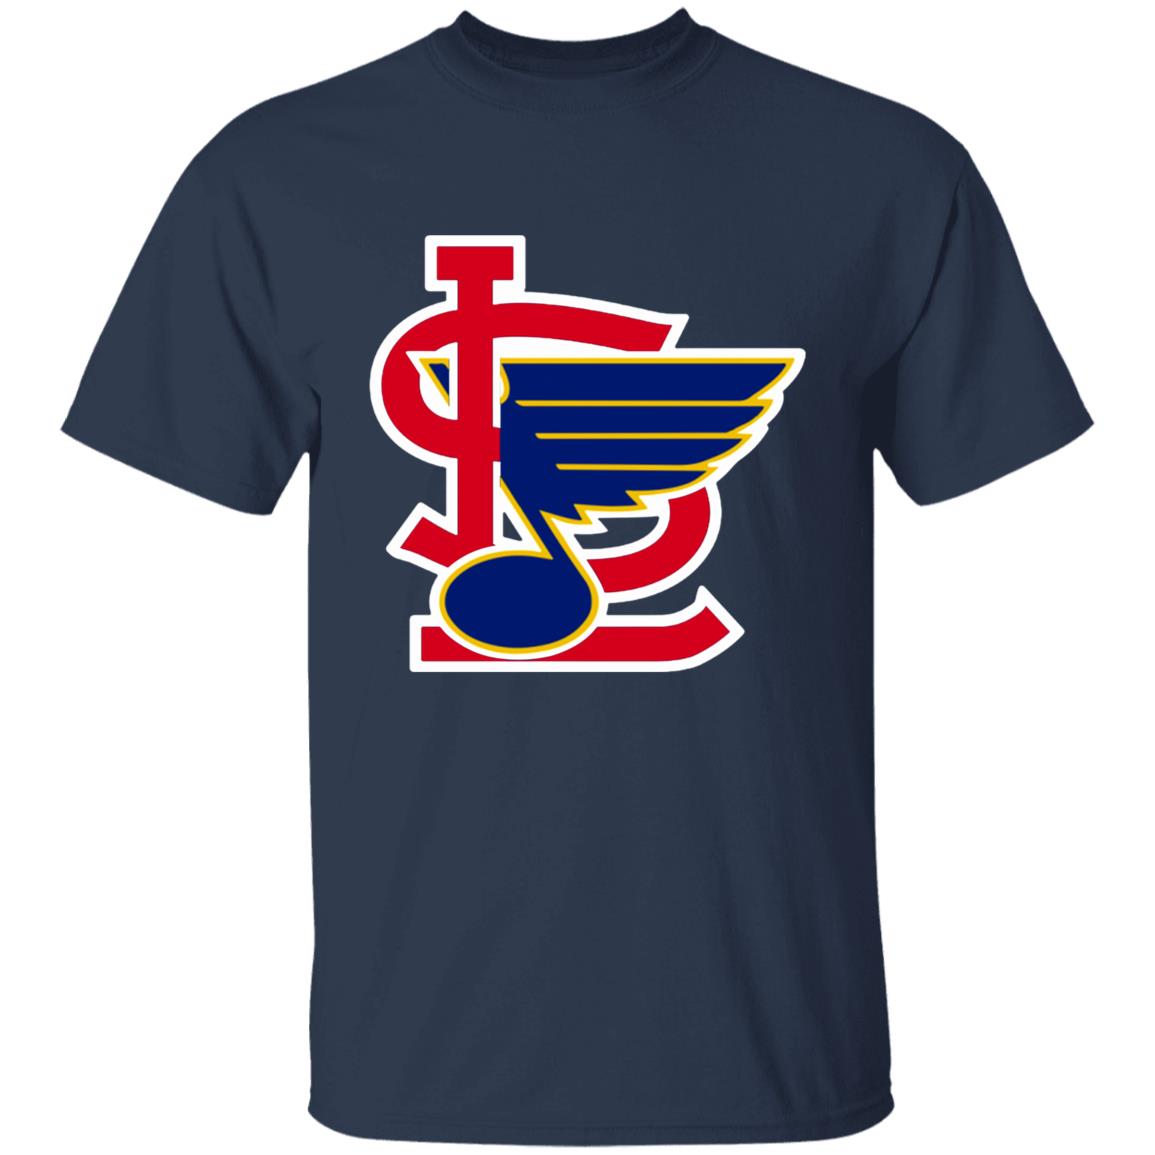 Its-All-About-The-St-Louis-Blues-For-Hockey-And-St1 G500 Gildan 5.3 Oz. T-Shirt